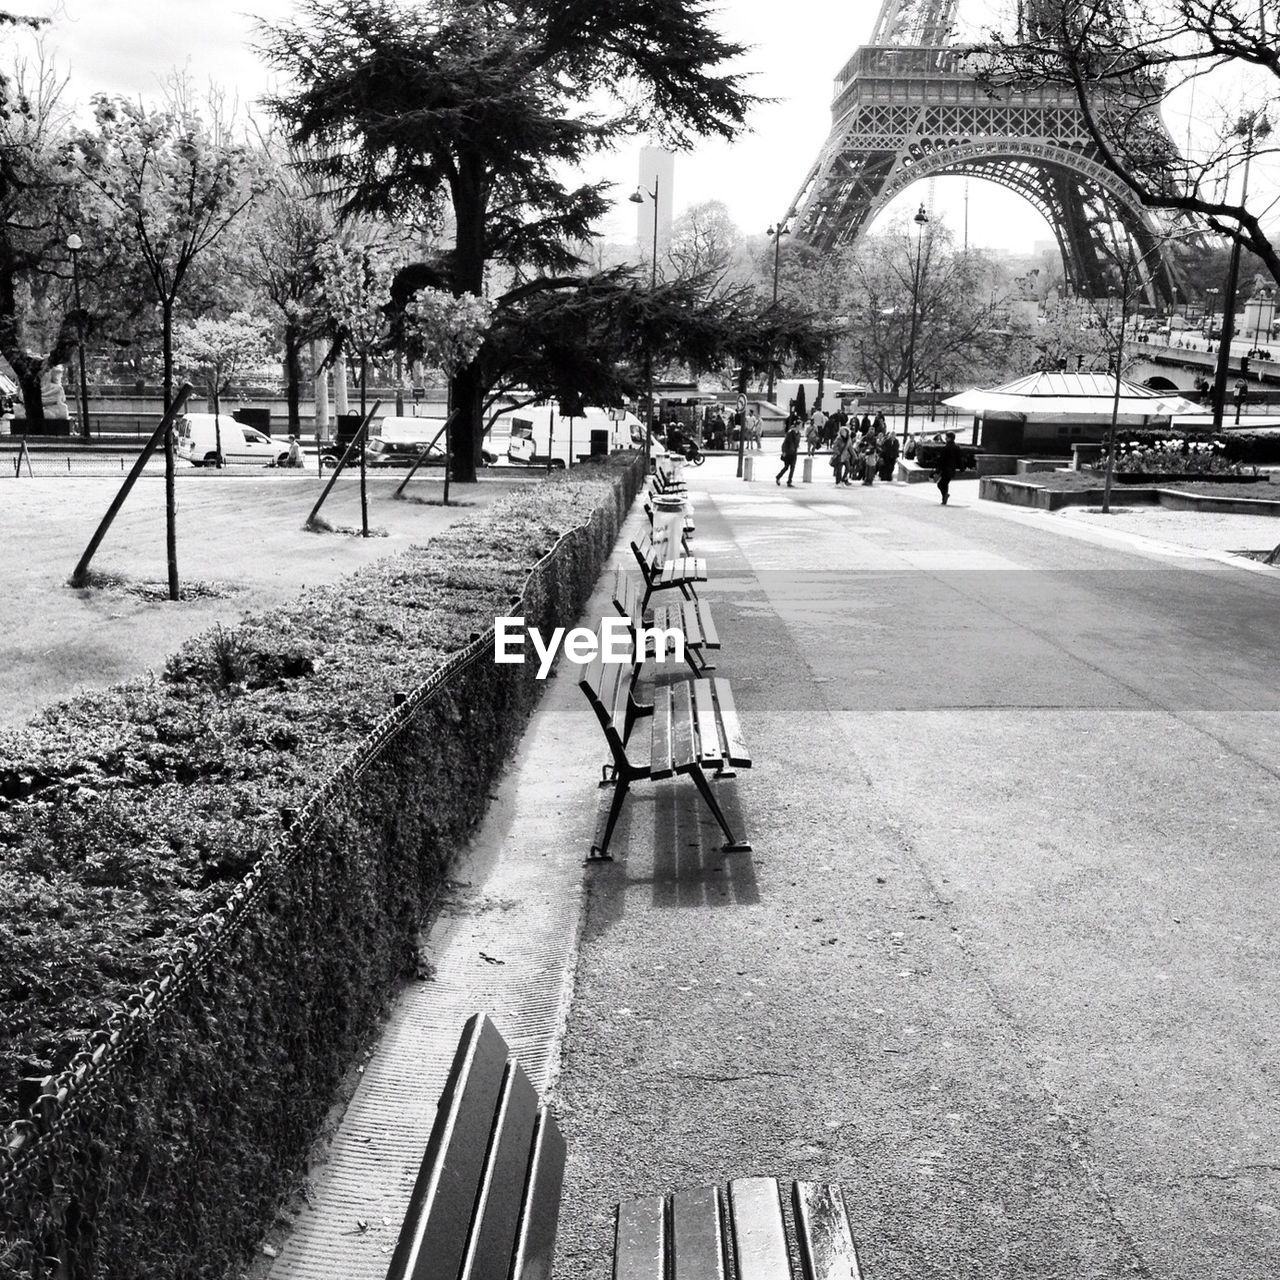 Park bench in front of eiffel tower